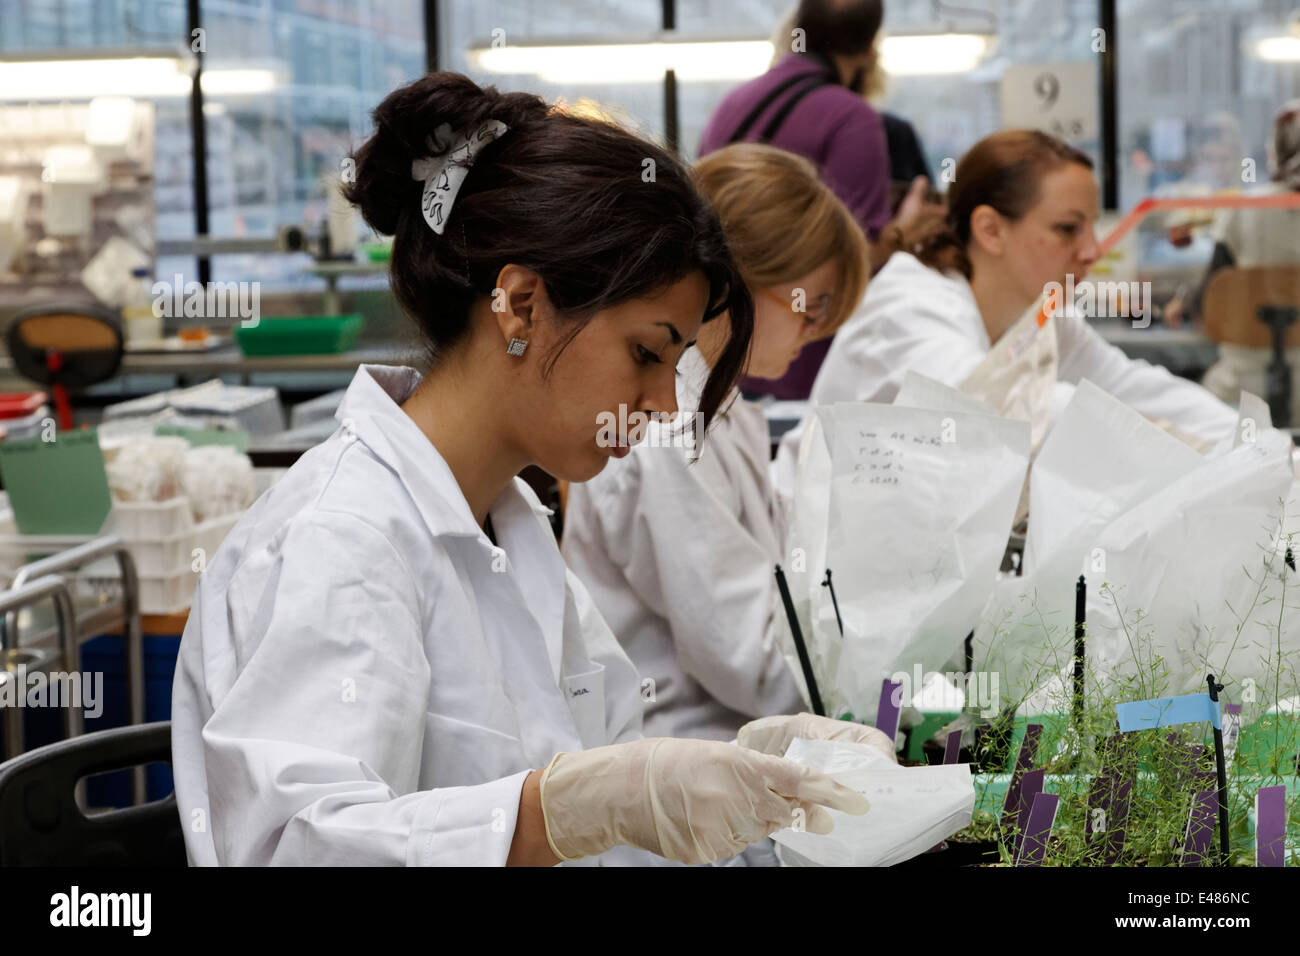 Max Planck Institute for Molecular Plant Physiology Foto Stock